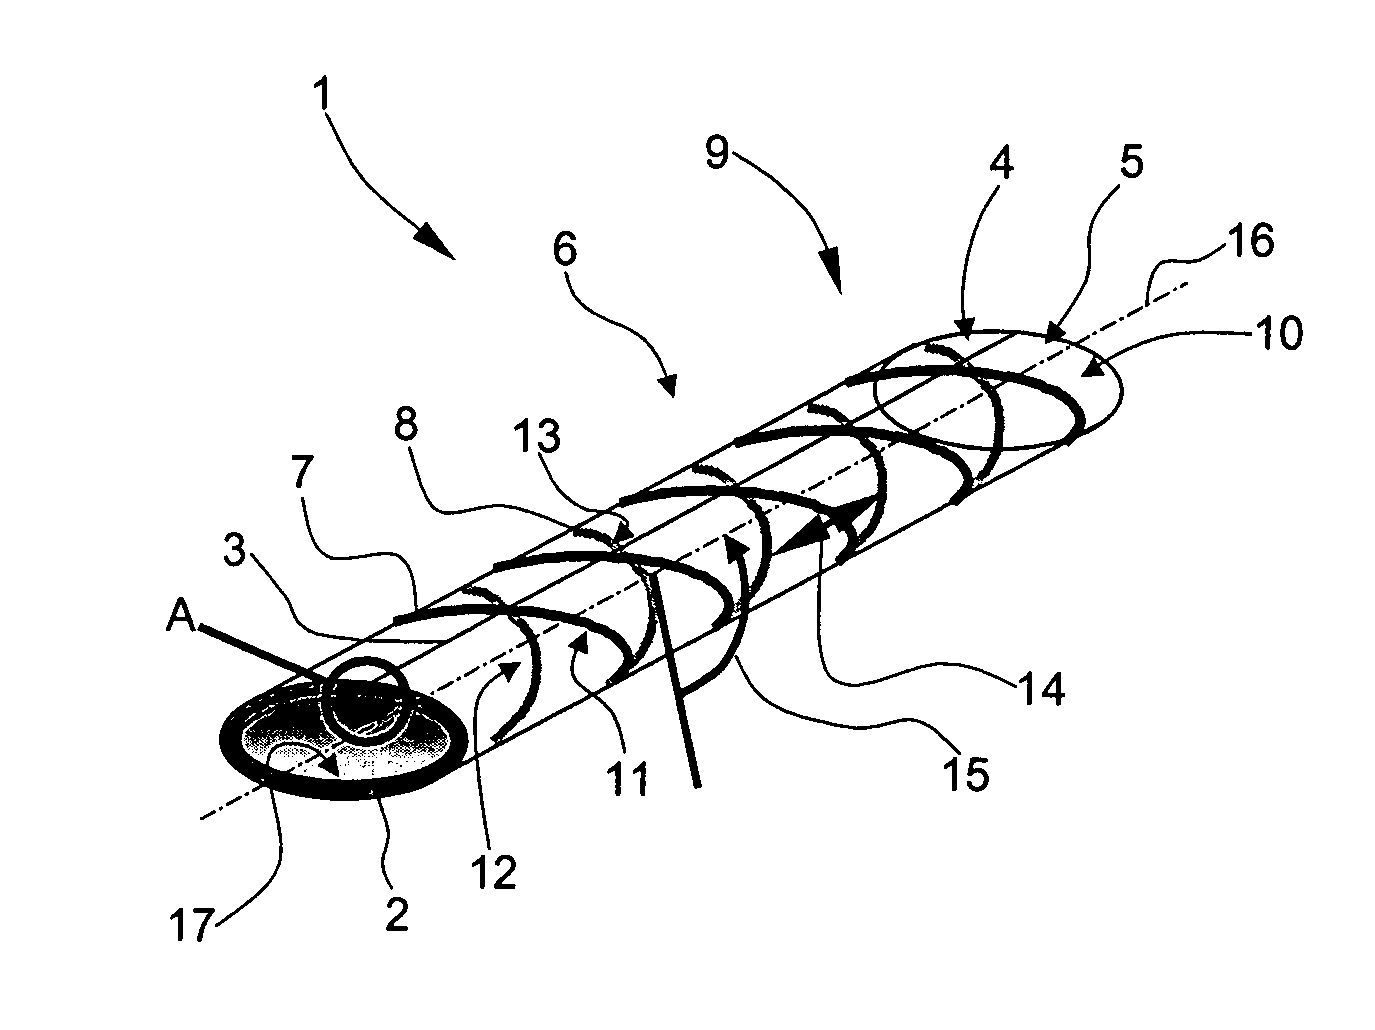 Pipeline for conducting air for air conditioning in aircrafts